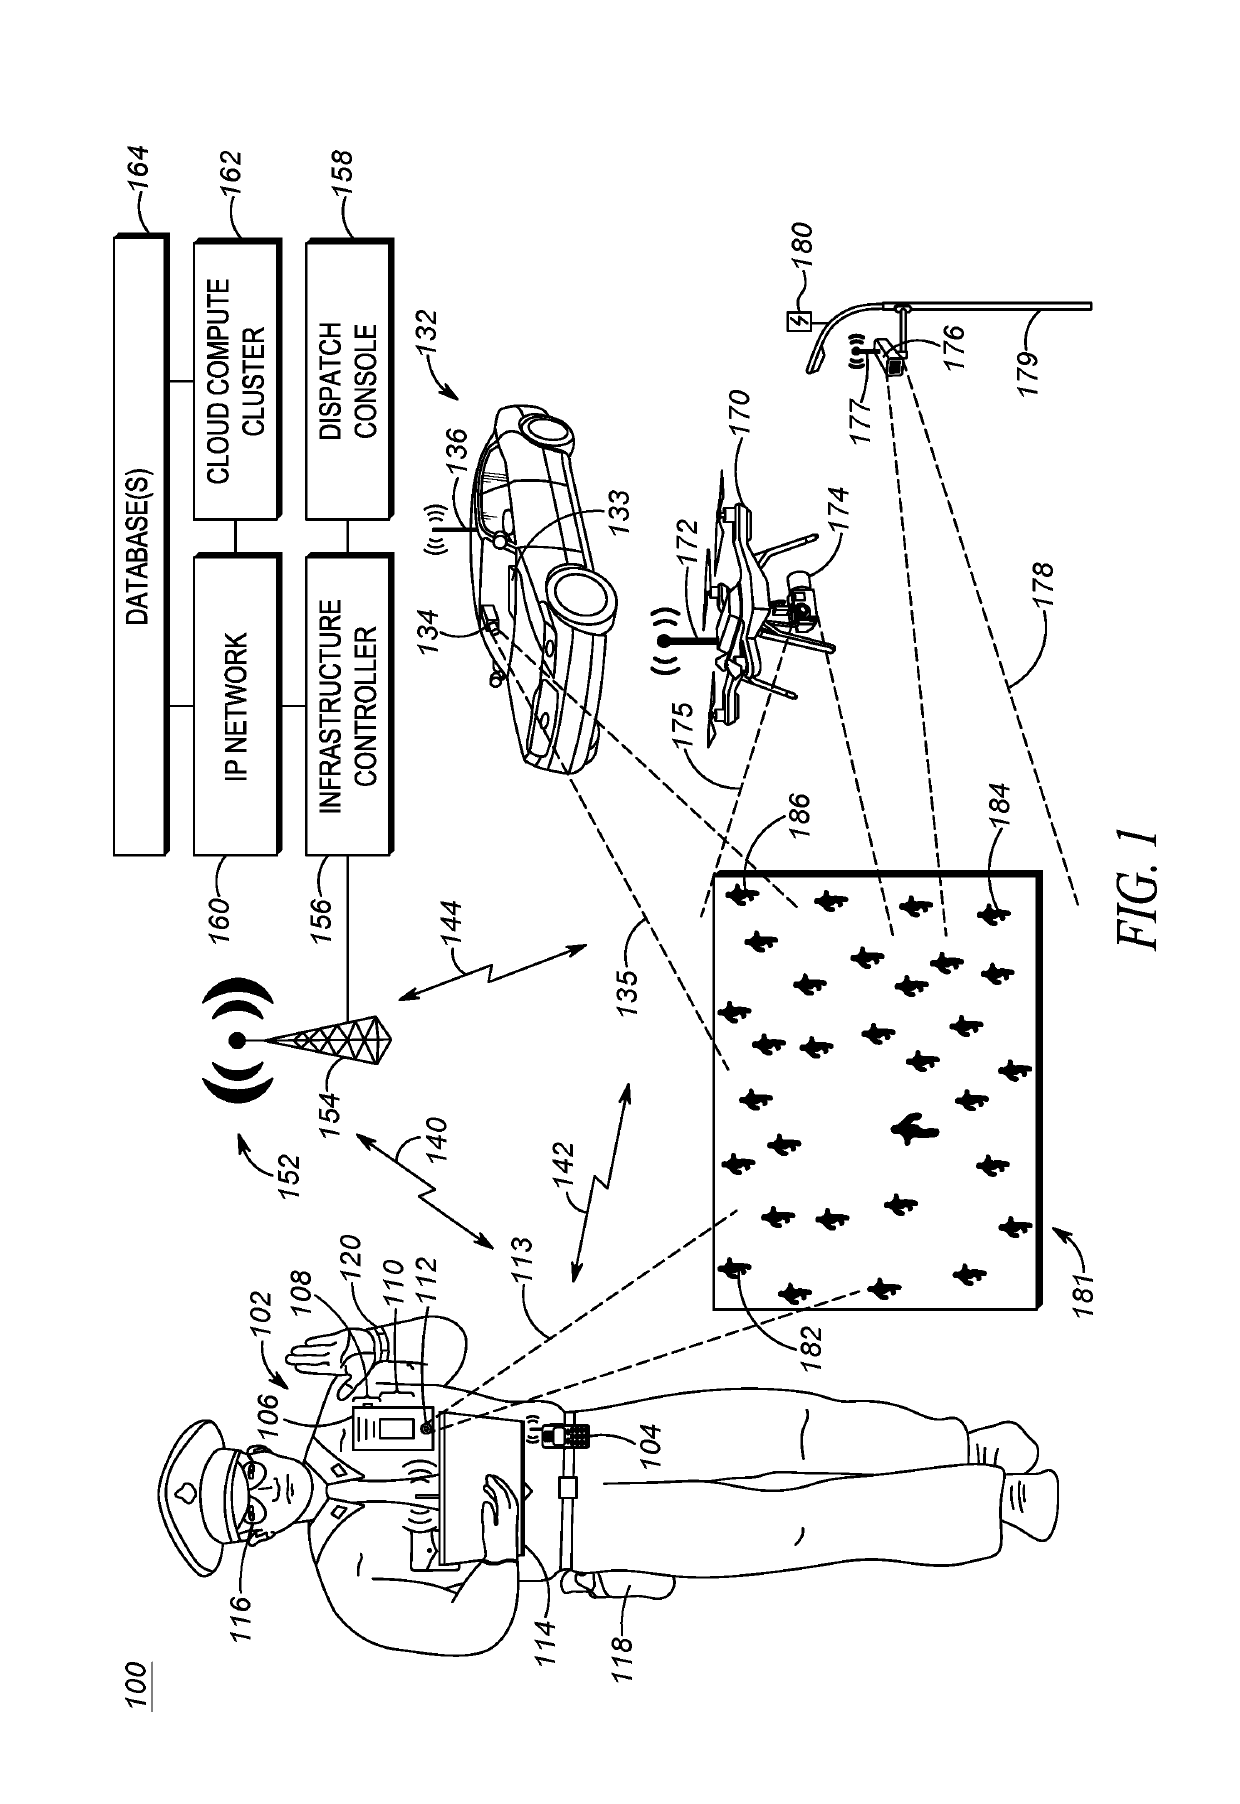 Method, device, and system for adaptive training of machine learning models via detected in-field contextual sensor events and associated located and retrieved digital audio and/or video imaging